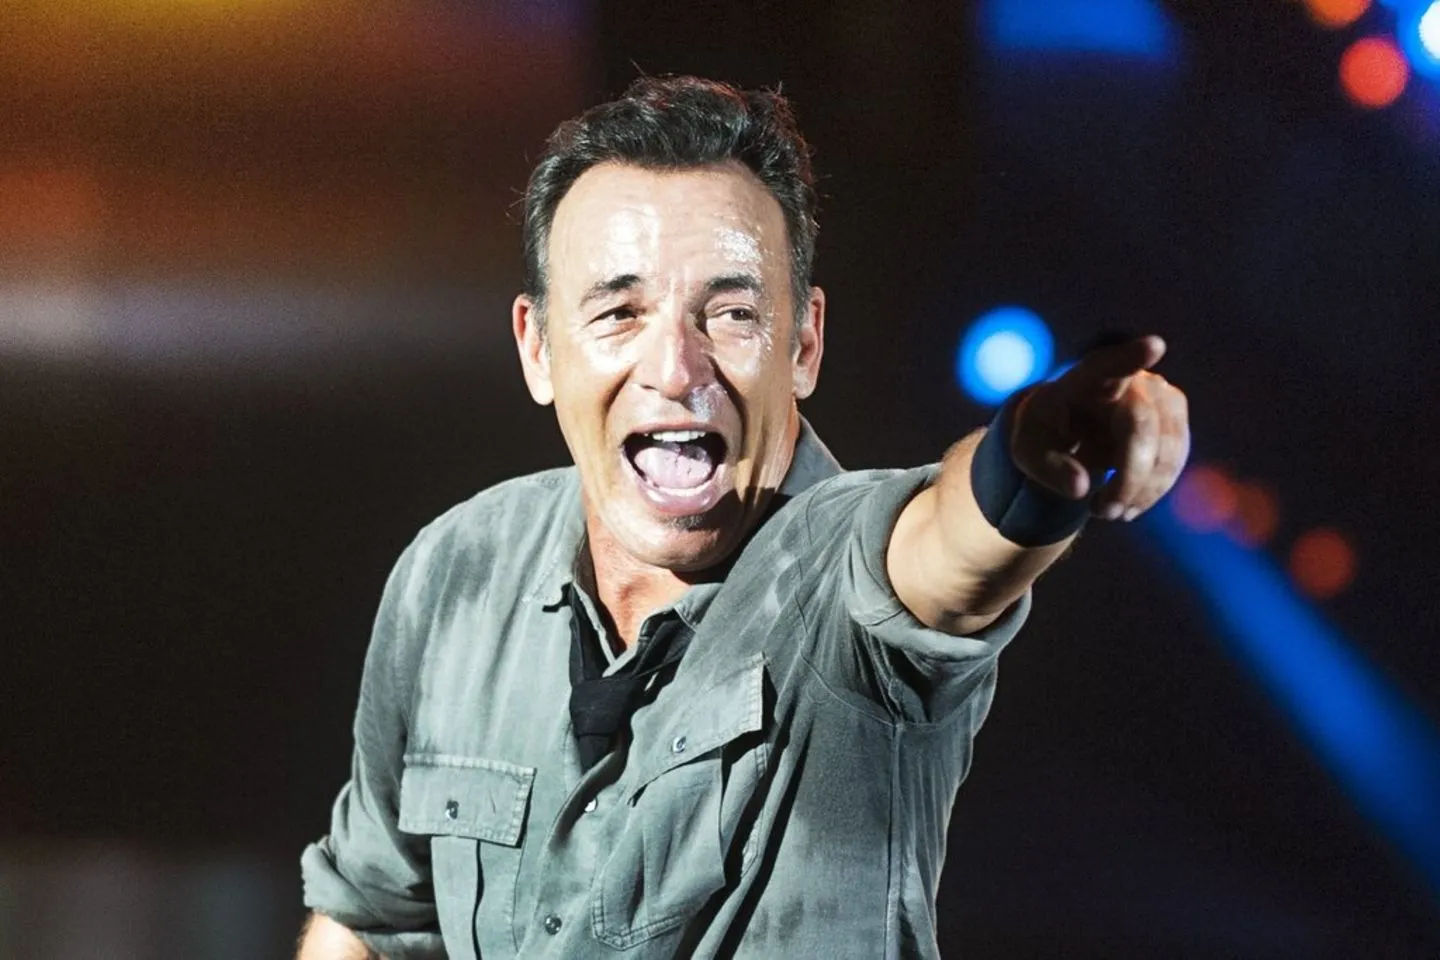 Who Is Bruce Springsteen? Age, Bio, Career, Net Worth, Family And More